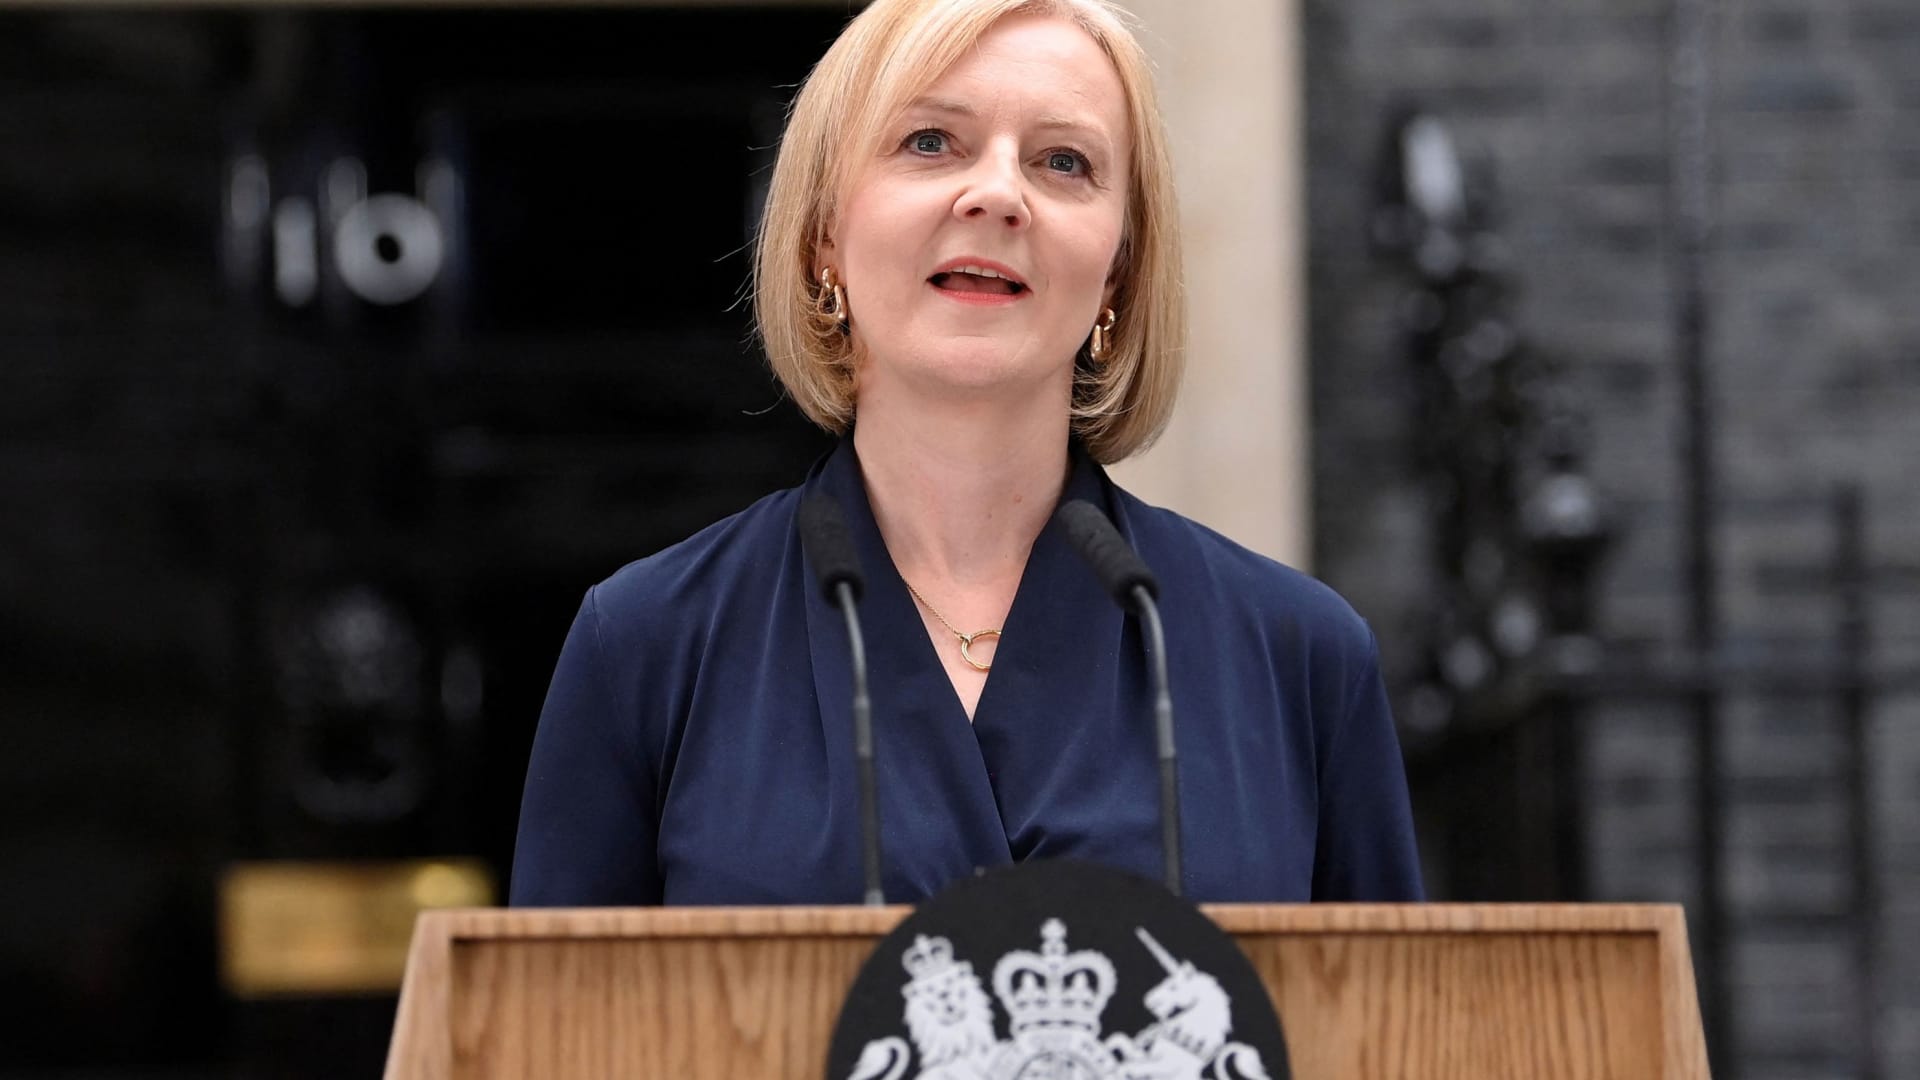 New British Prime Minister Liz Truss delivers a speech outside Downing Street, in London, Britain September 6, 2022.